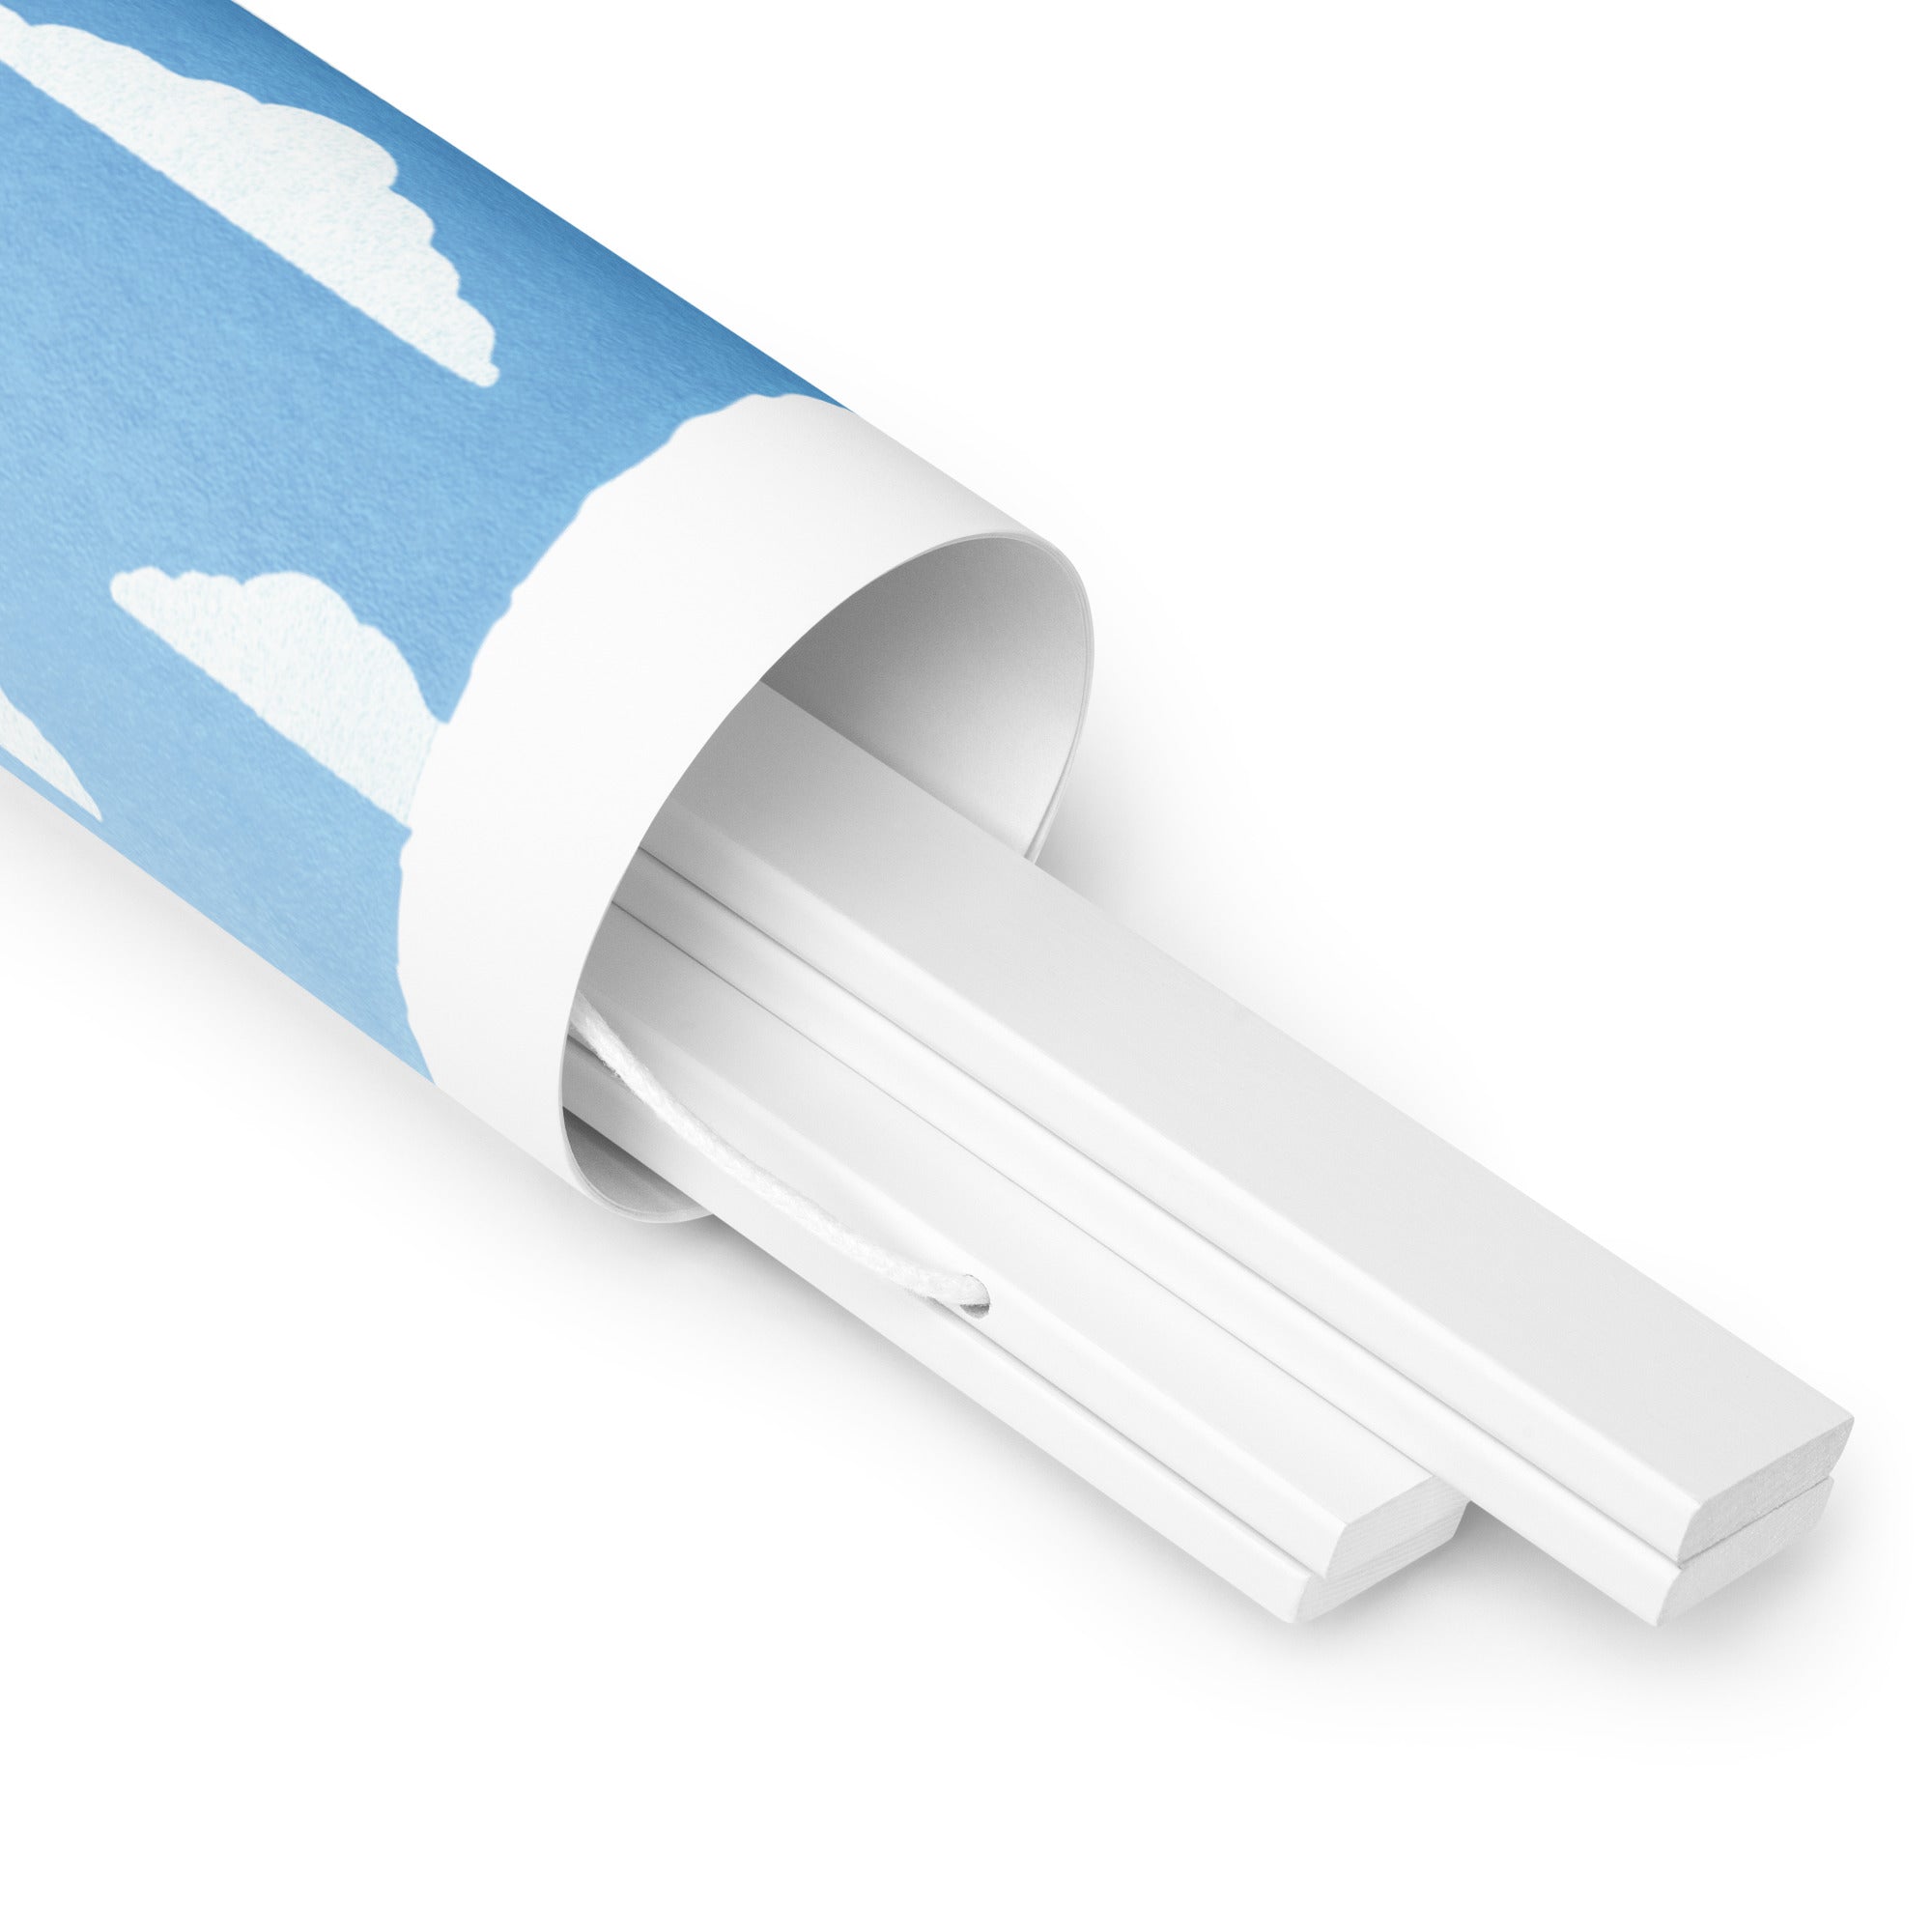 A white tube with a blue cloud design on it. 
Product Name: From Our Fields to Your Family Poster
Brand Name: Shop Wyman's